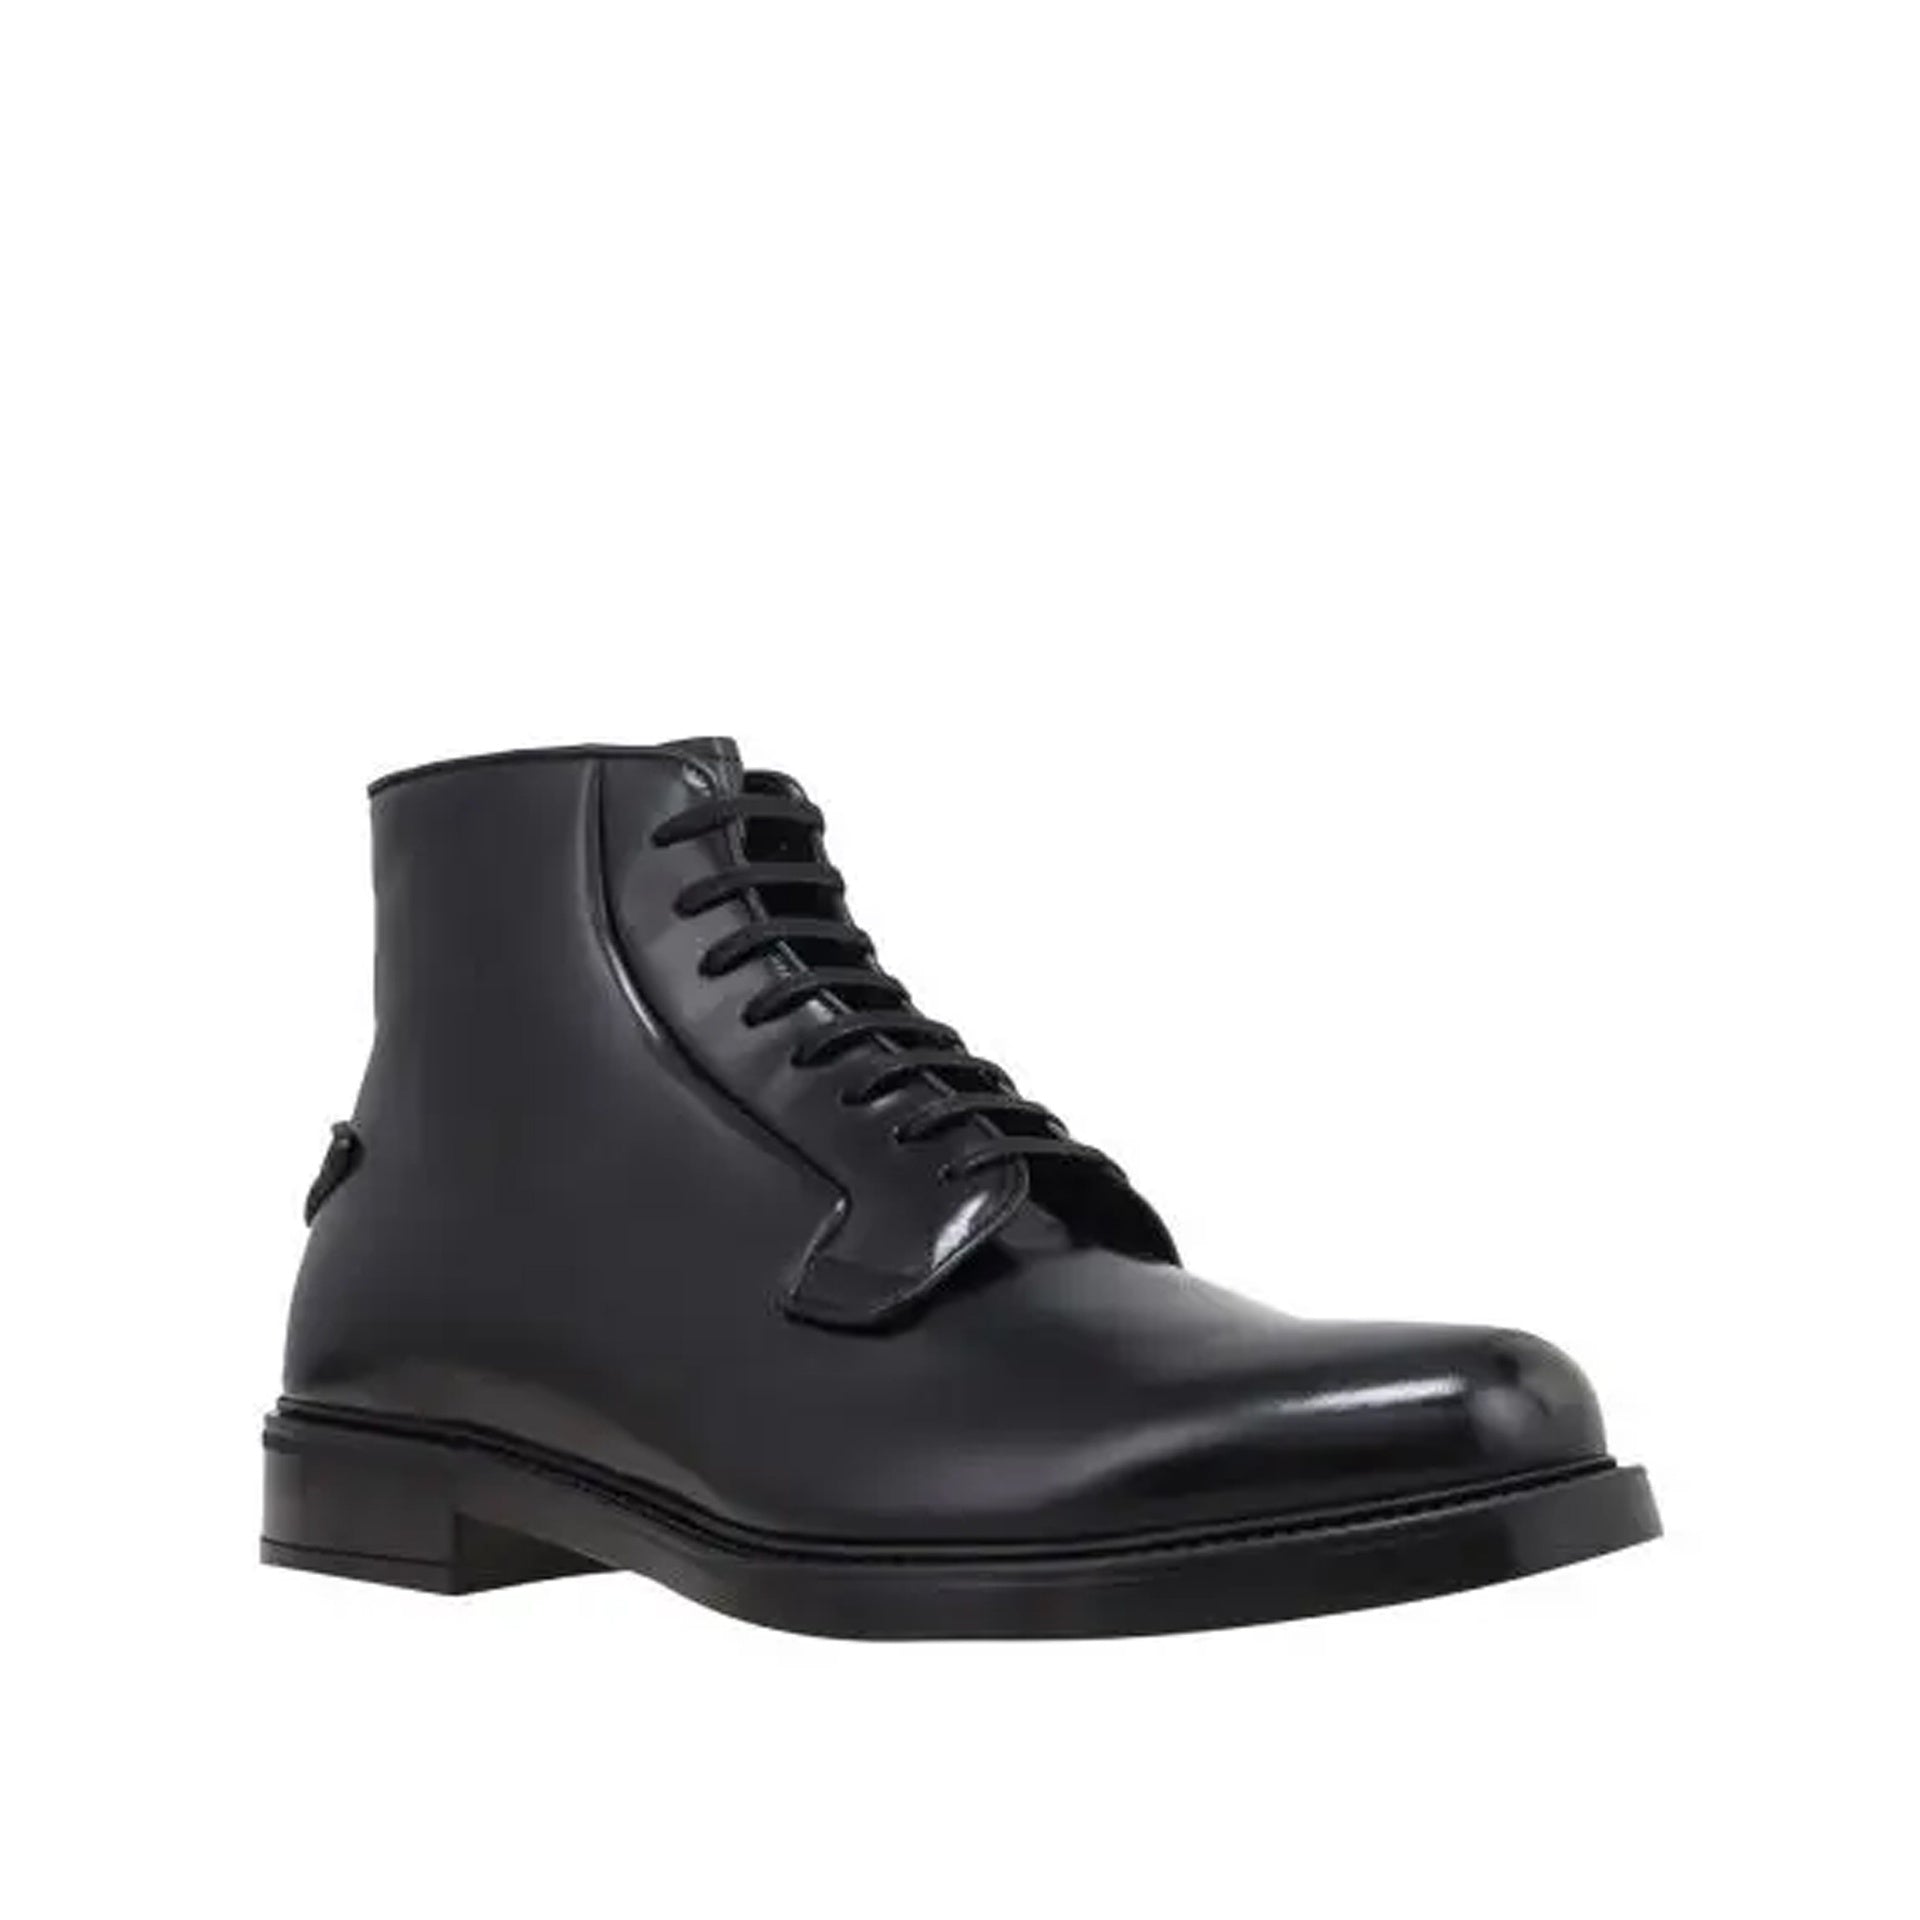 Prada Leather Lace-Up Boots